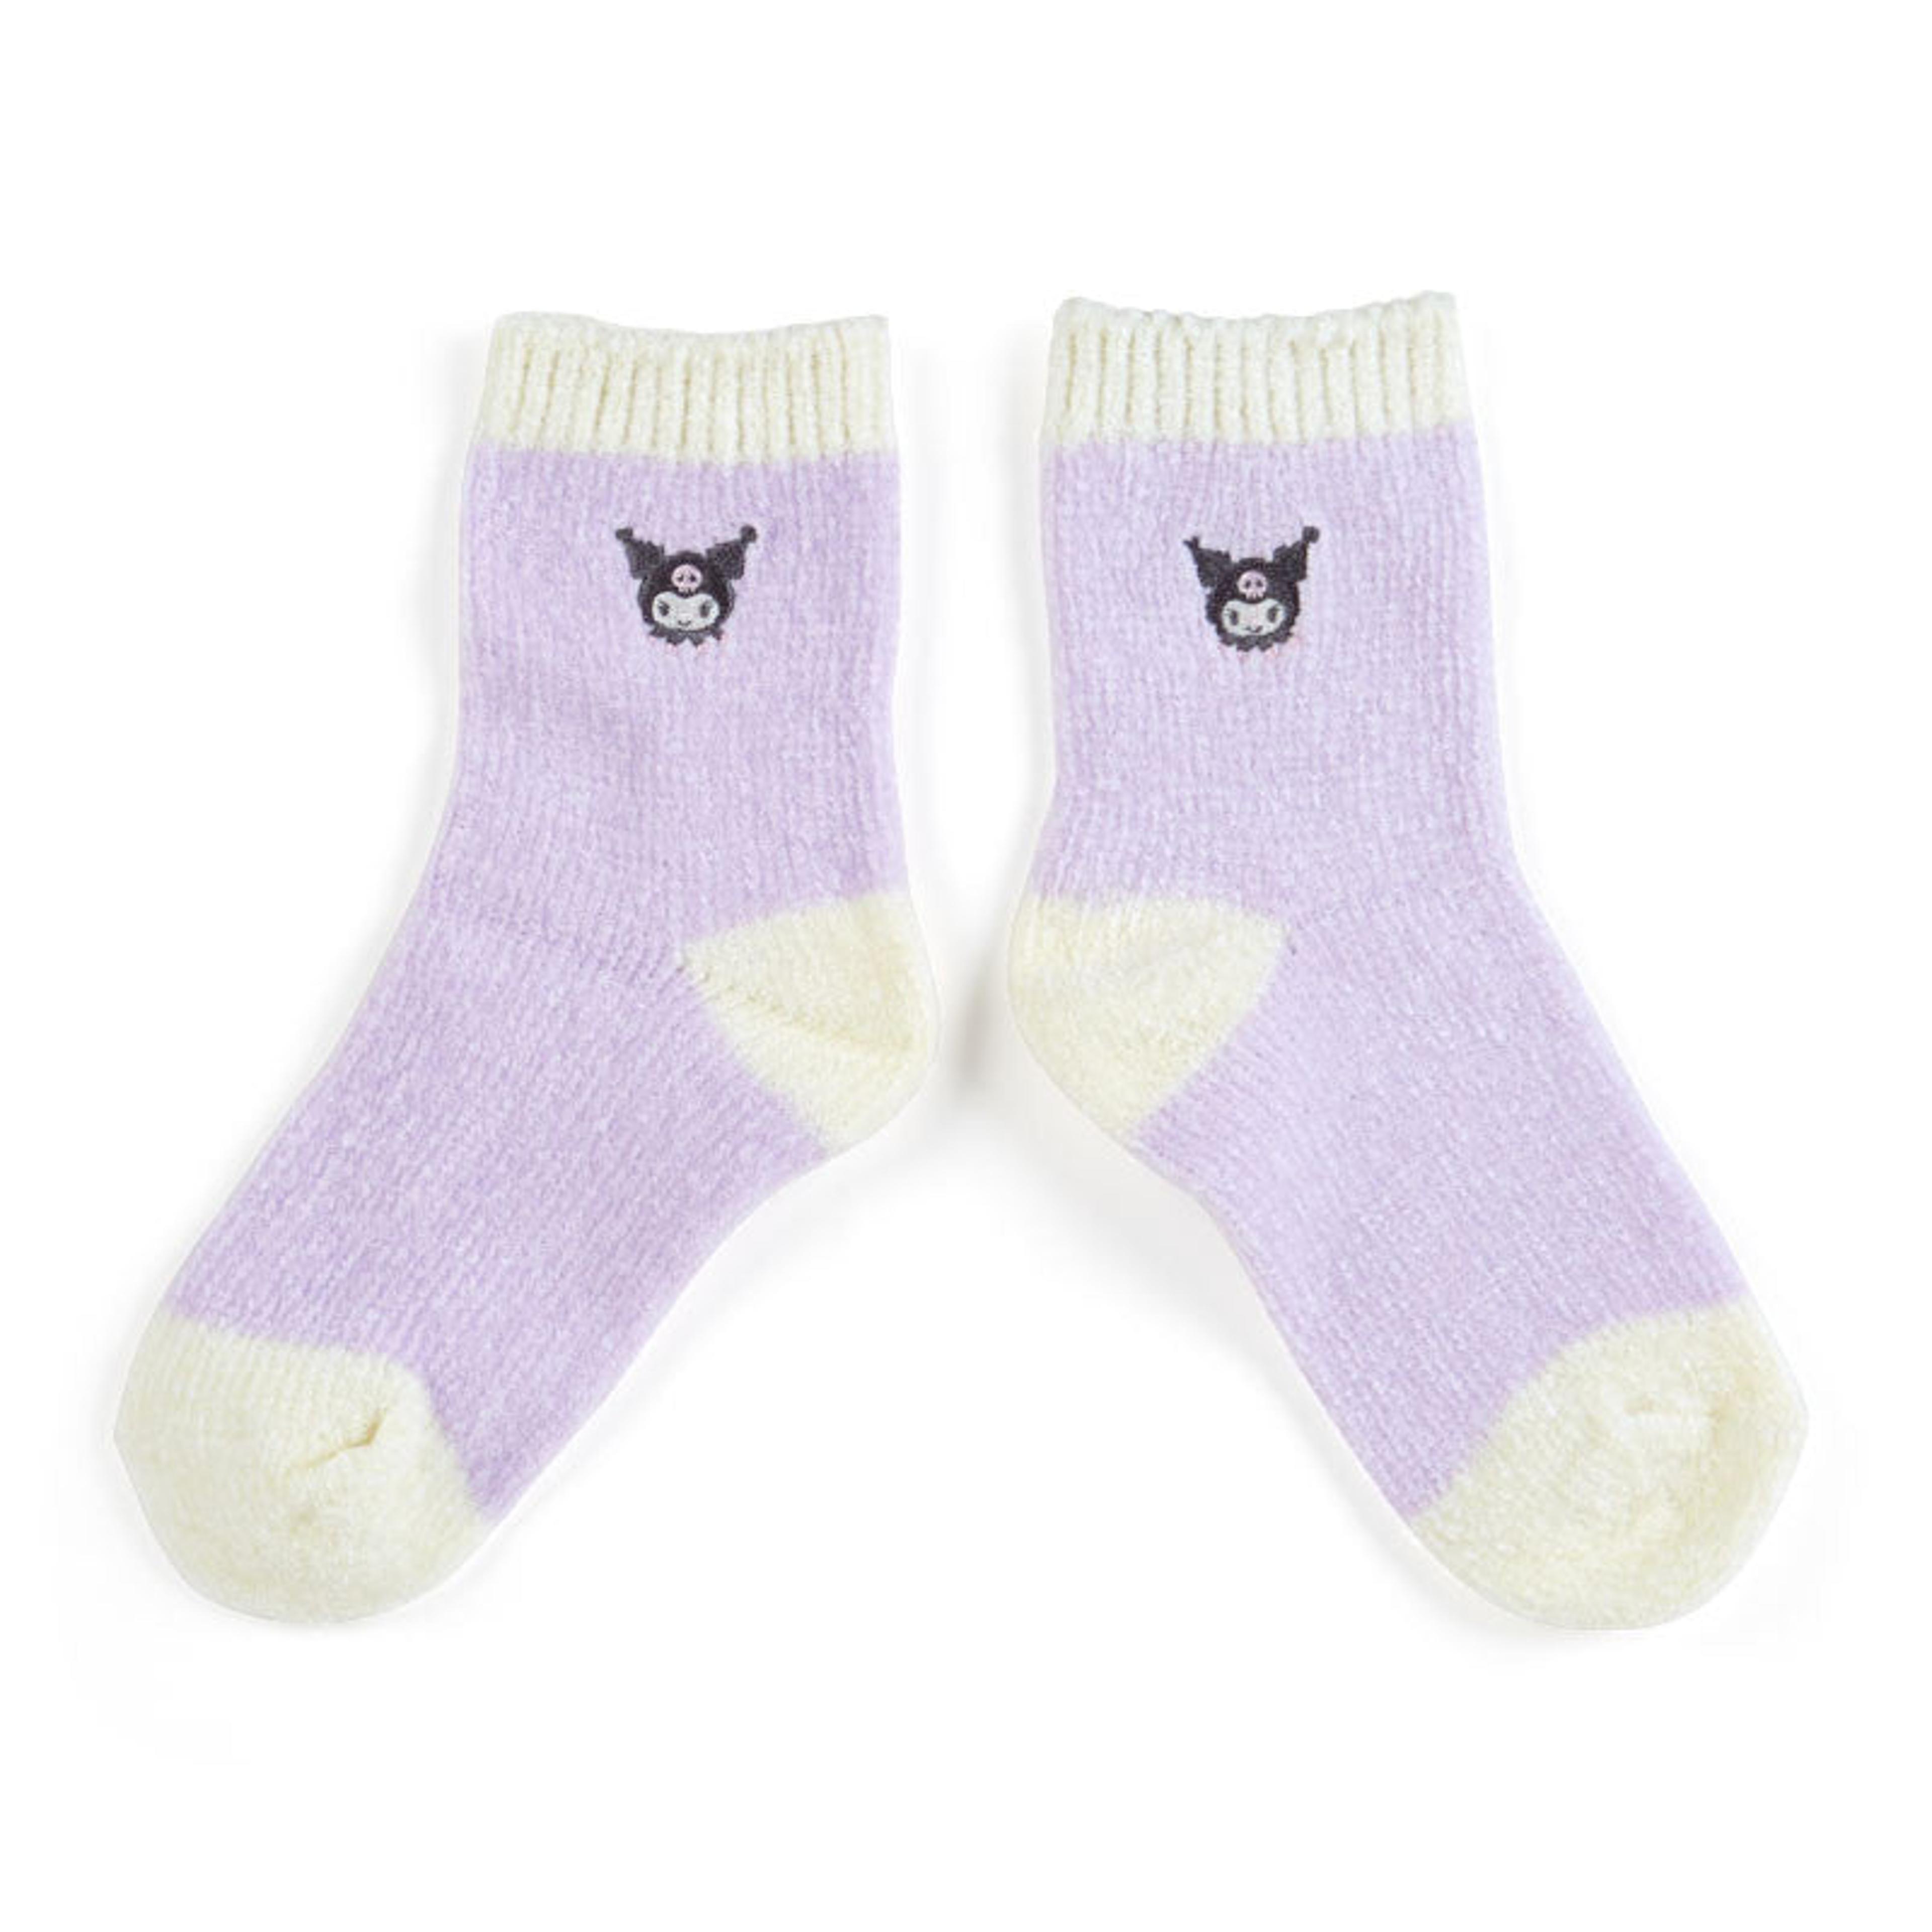 Alternate View 6 of Sanrio Characters Embroidered Chenille Adult Socks